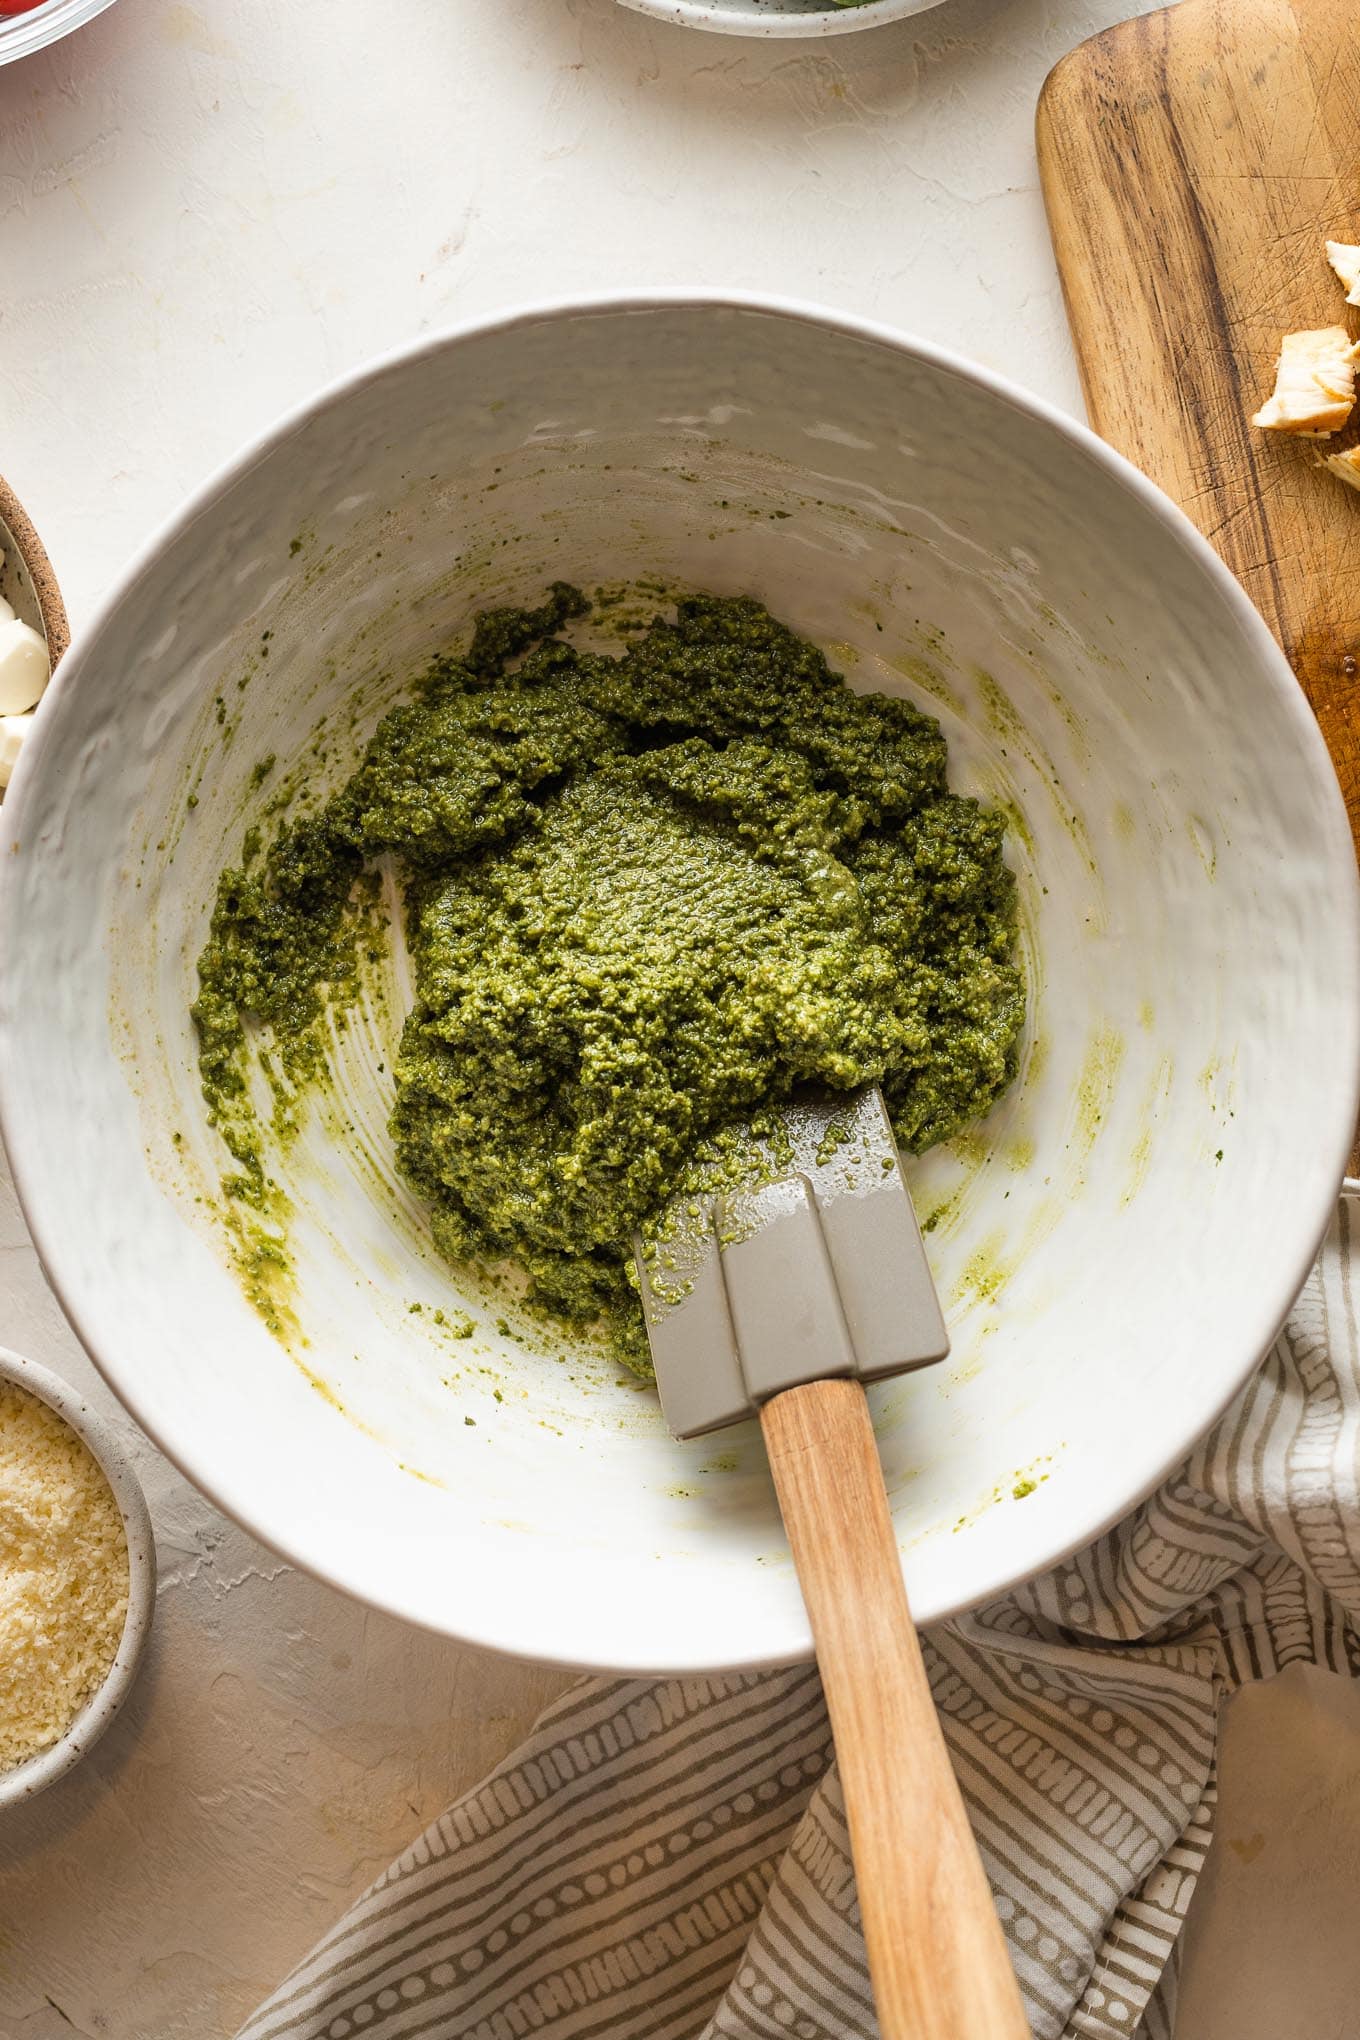 Pesto and red wine vinegar mixed together in a large white bowl.